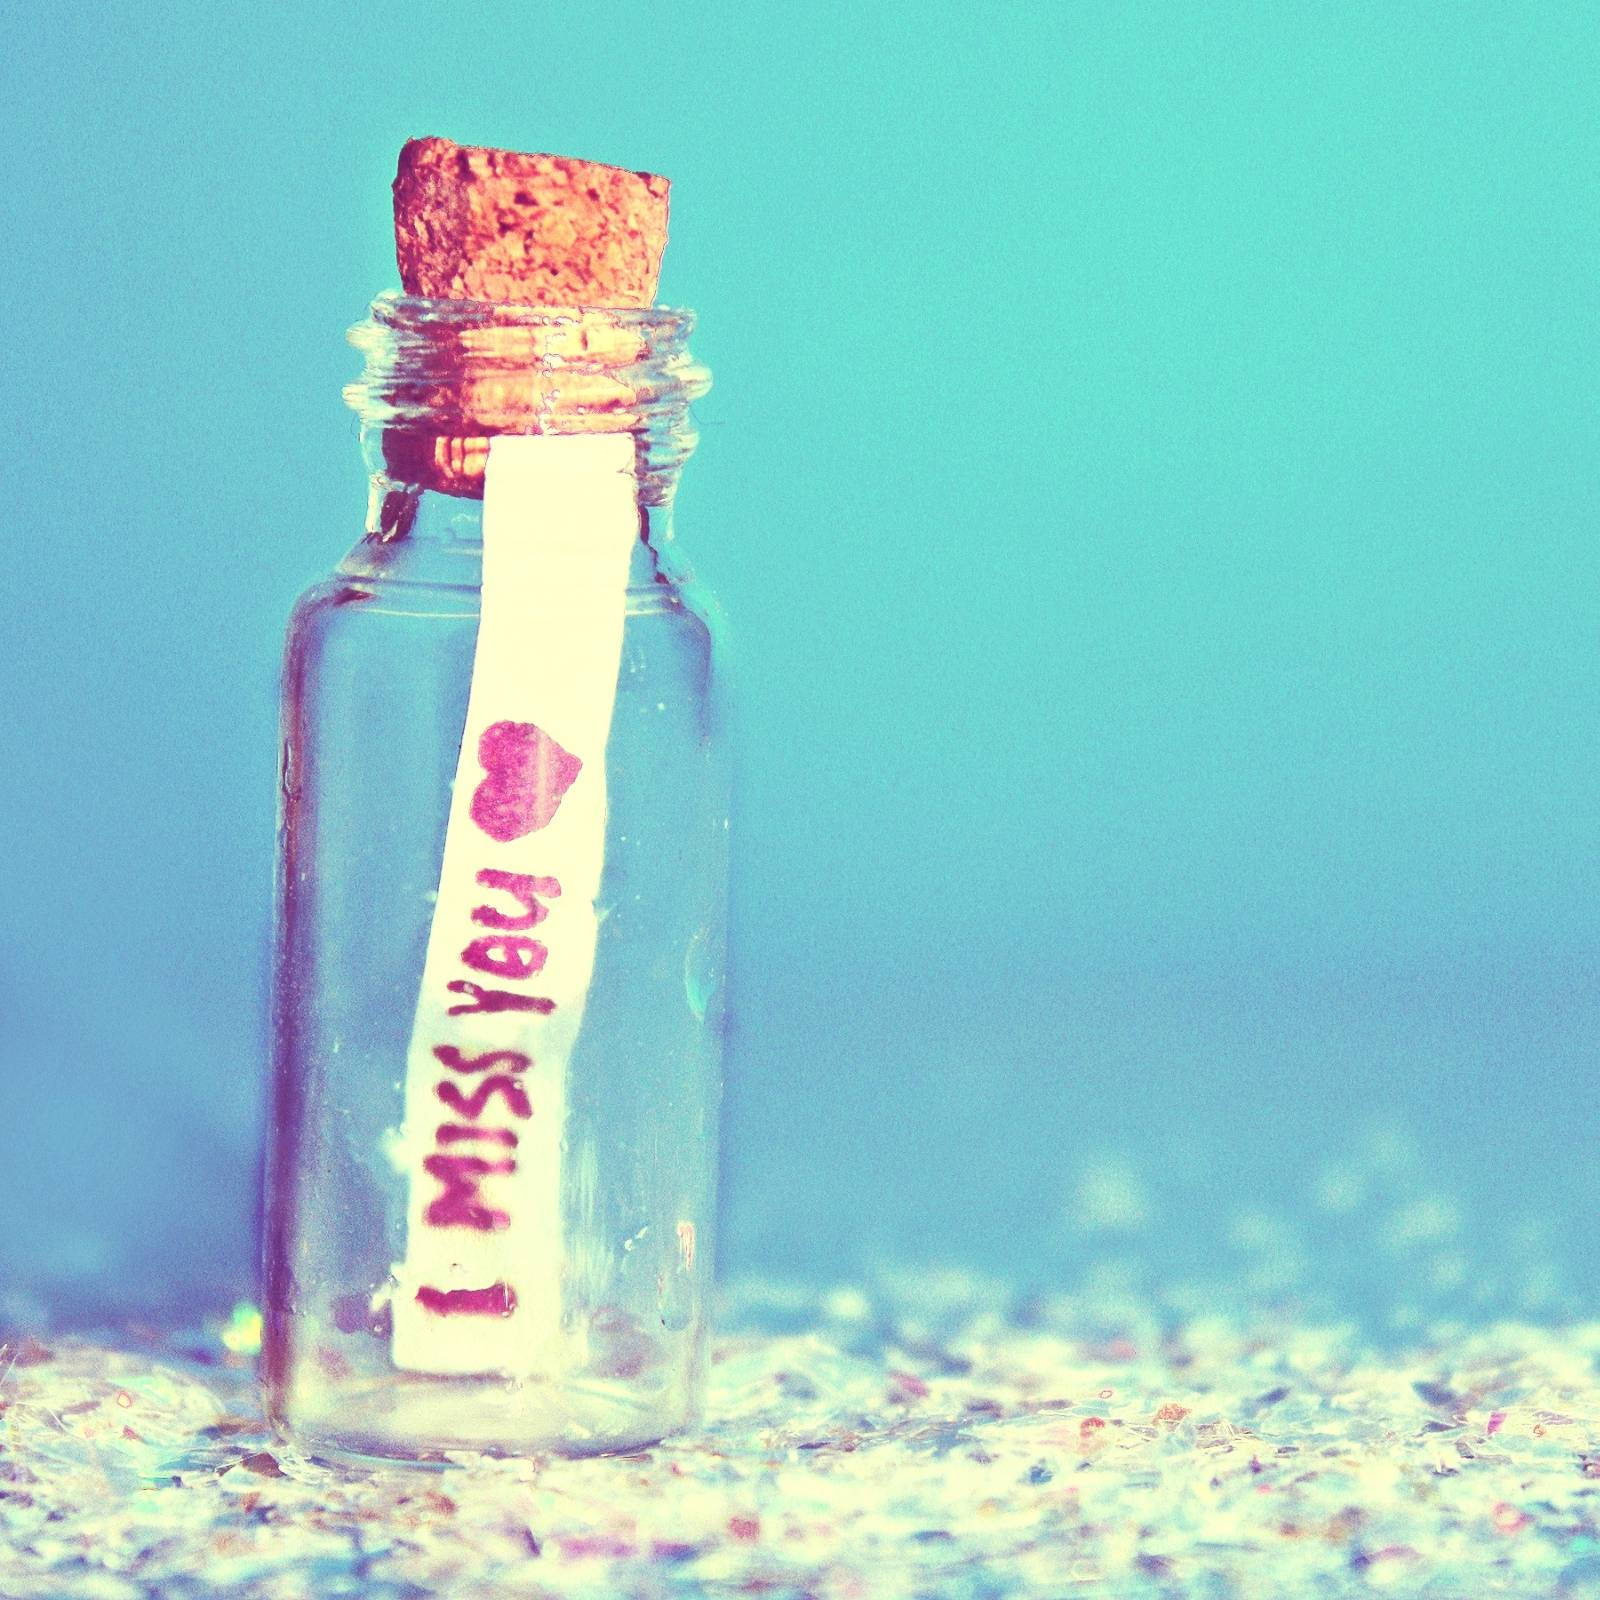 Emotional Message In A Bottle Saying 'i Miss You' Background